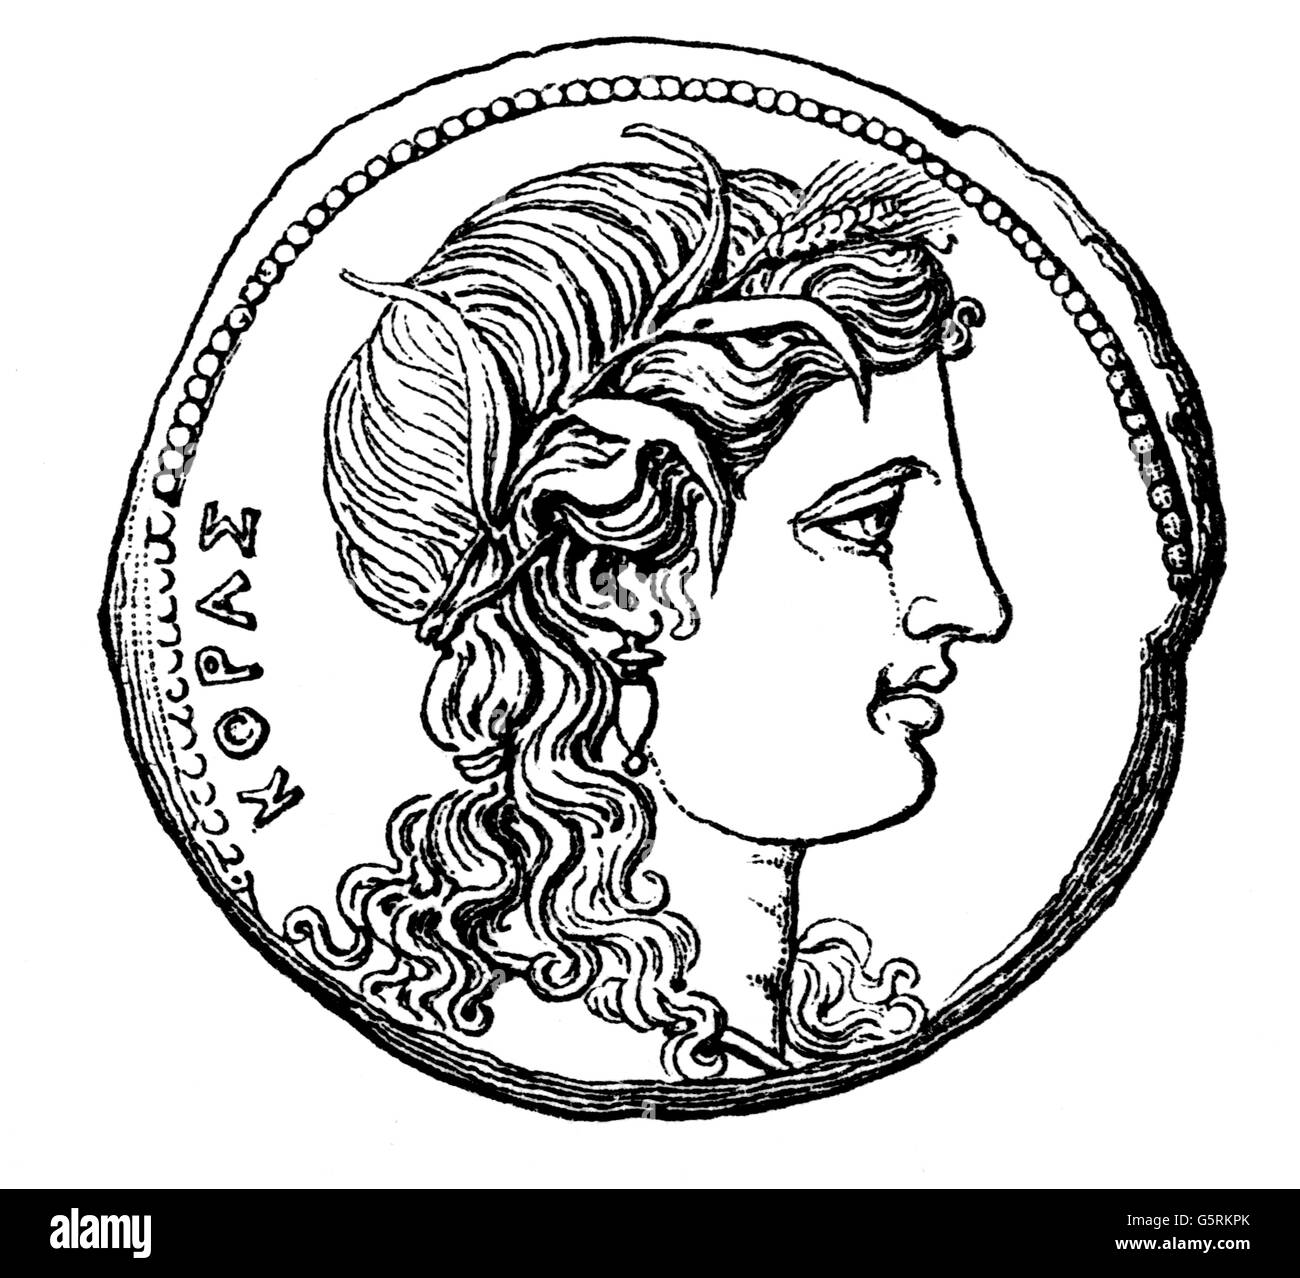 money / finances, coins, ancient world, Greece, Tetradrachme of the Agathocles of Syracuse, 305 / 295 BC, frontside, head of the Kore Persephone, wood engraving, 19th century, Greek coin, drachma, Sicily, Greater Greece, Magna Graecia, deity, divinity, deities, goddess, goddesses, historic, historical, ancient world, people, Additional-Rights-Clearences-Not Available Stock Photo